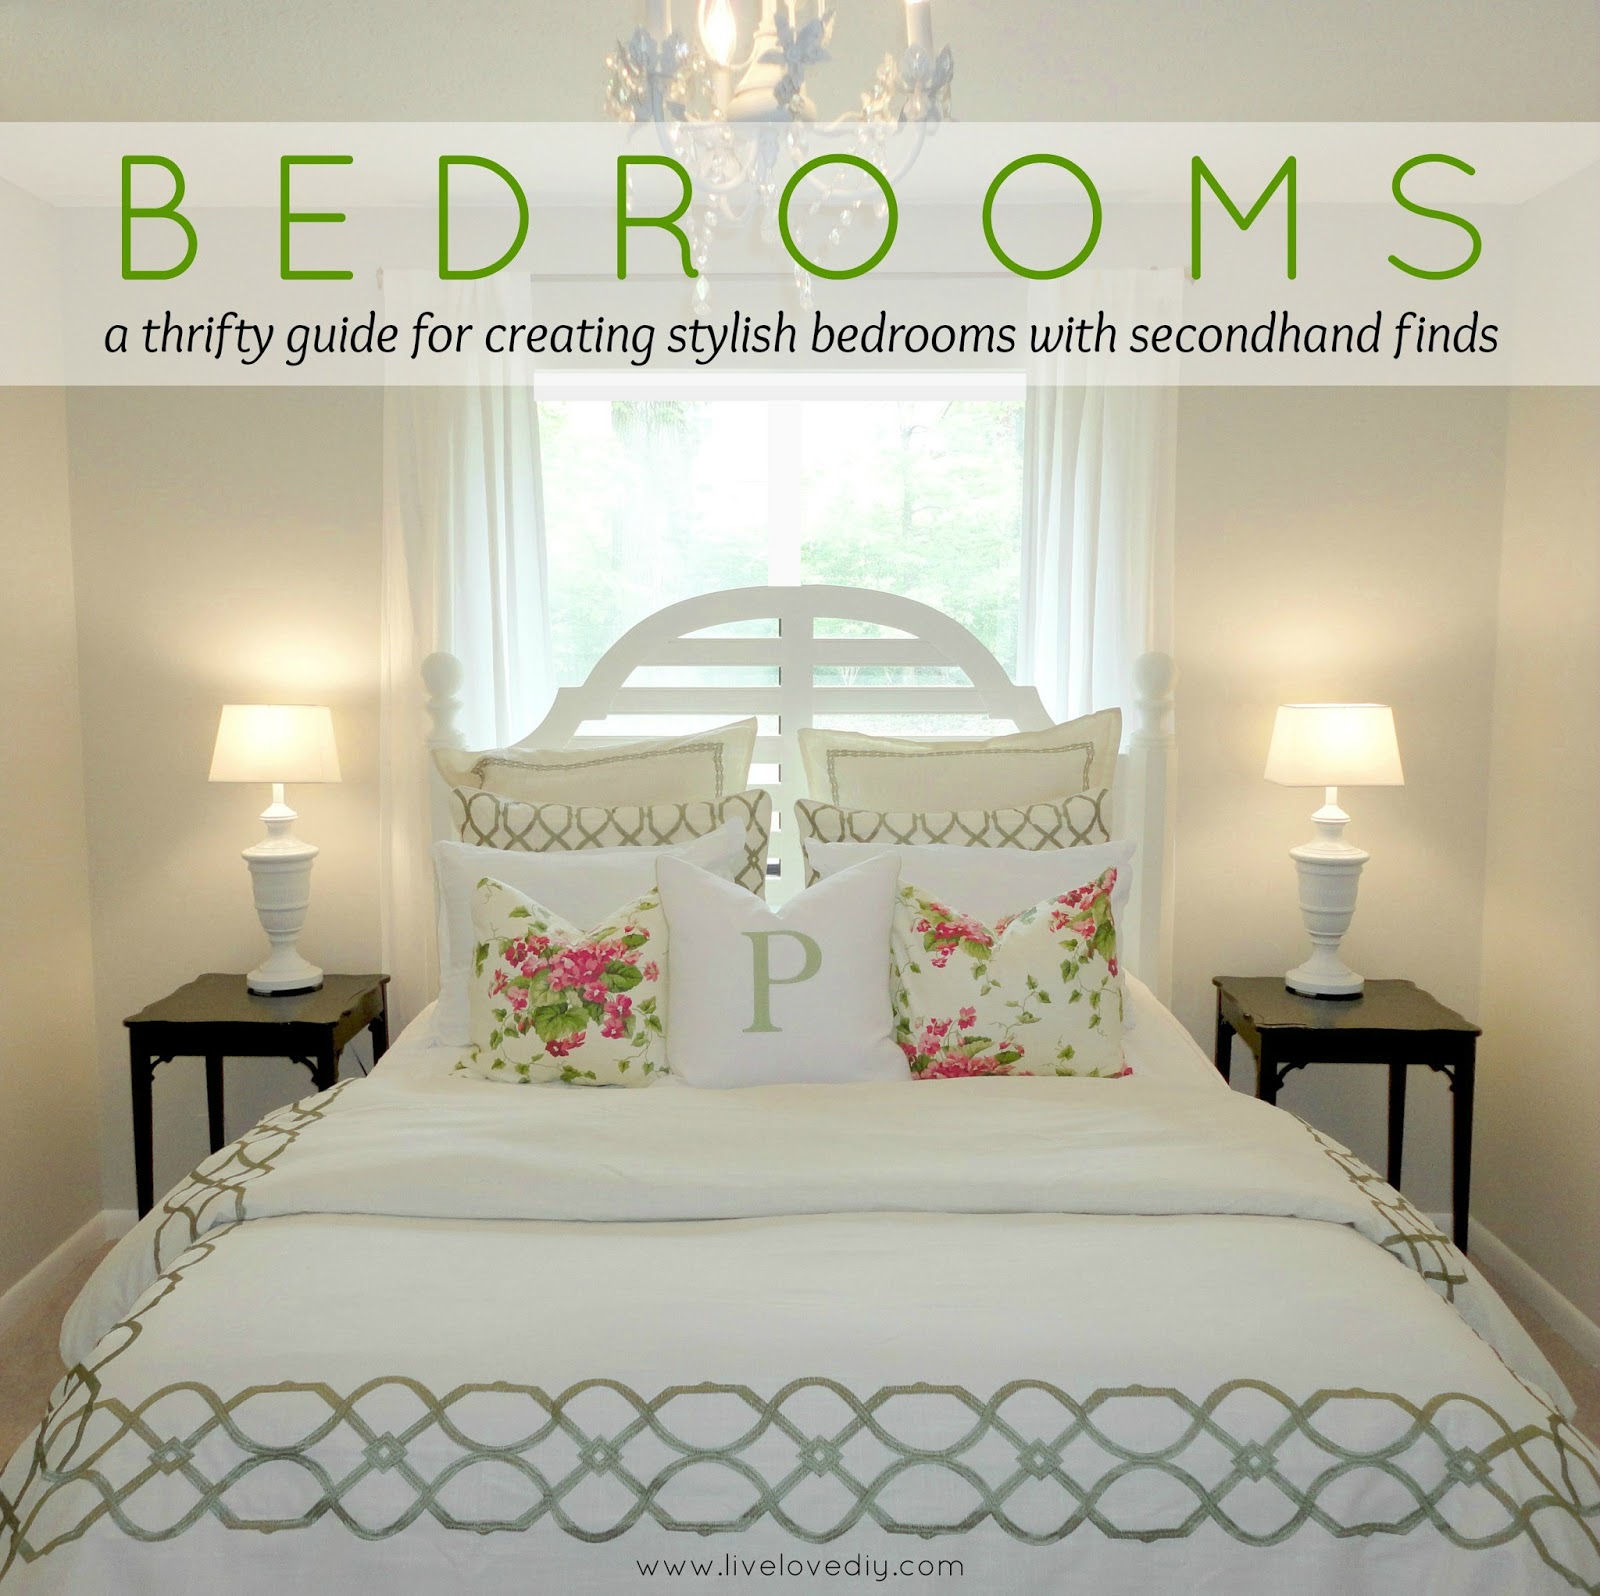 Best Image of Beautiful Bedrooms On A Budget | Milan Conley Journal